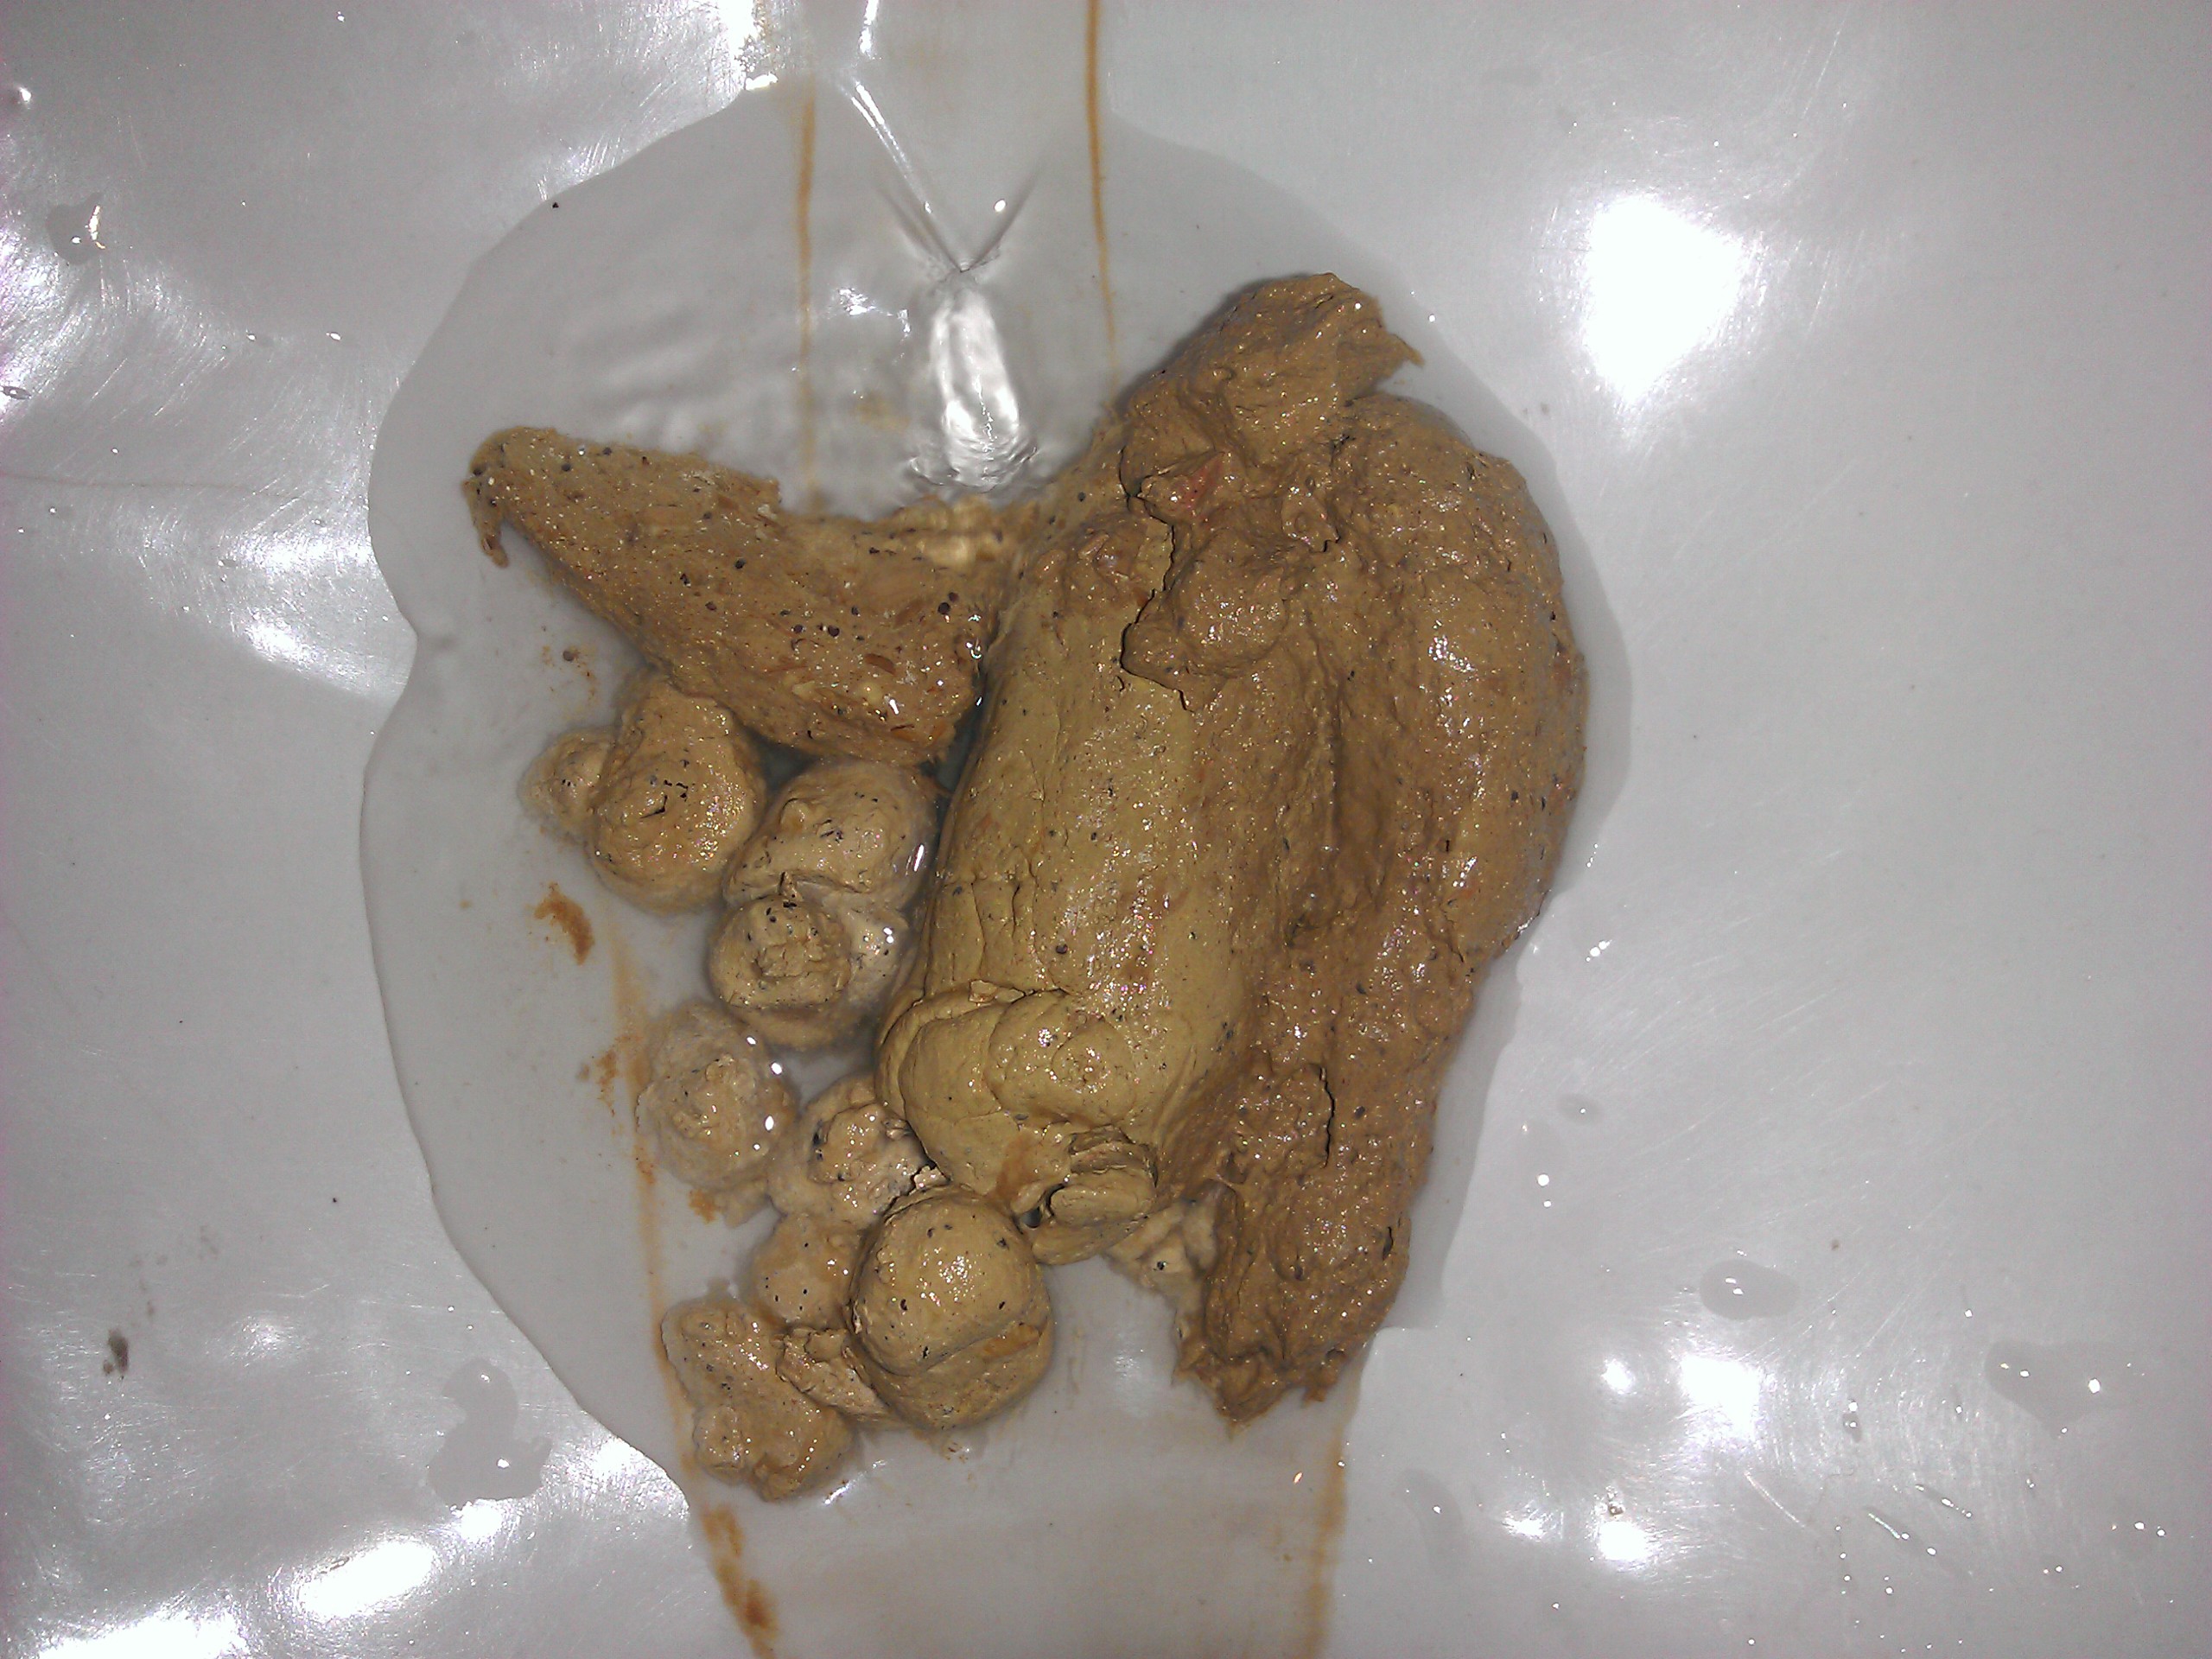 - Major side effects of consuming human feces